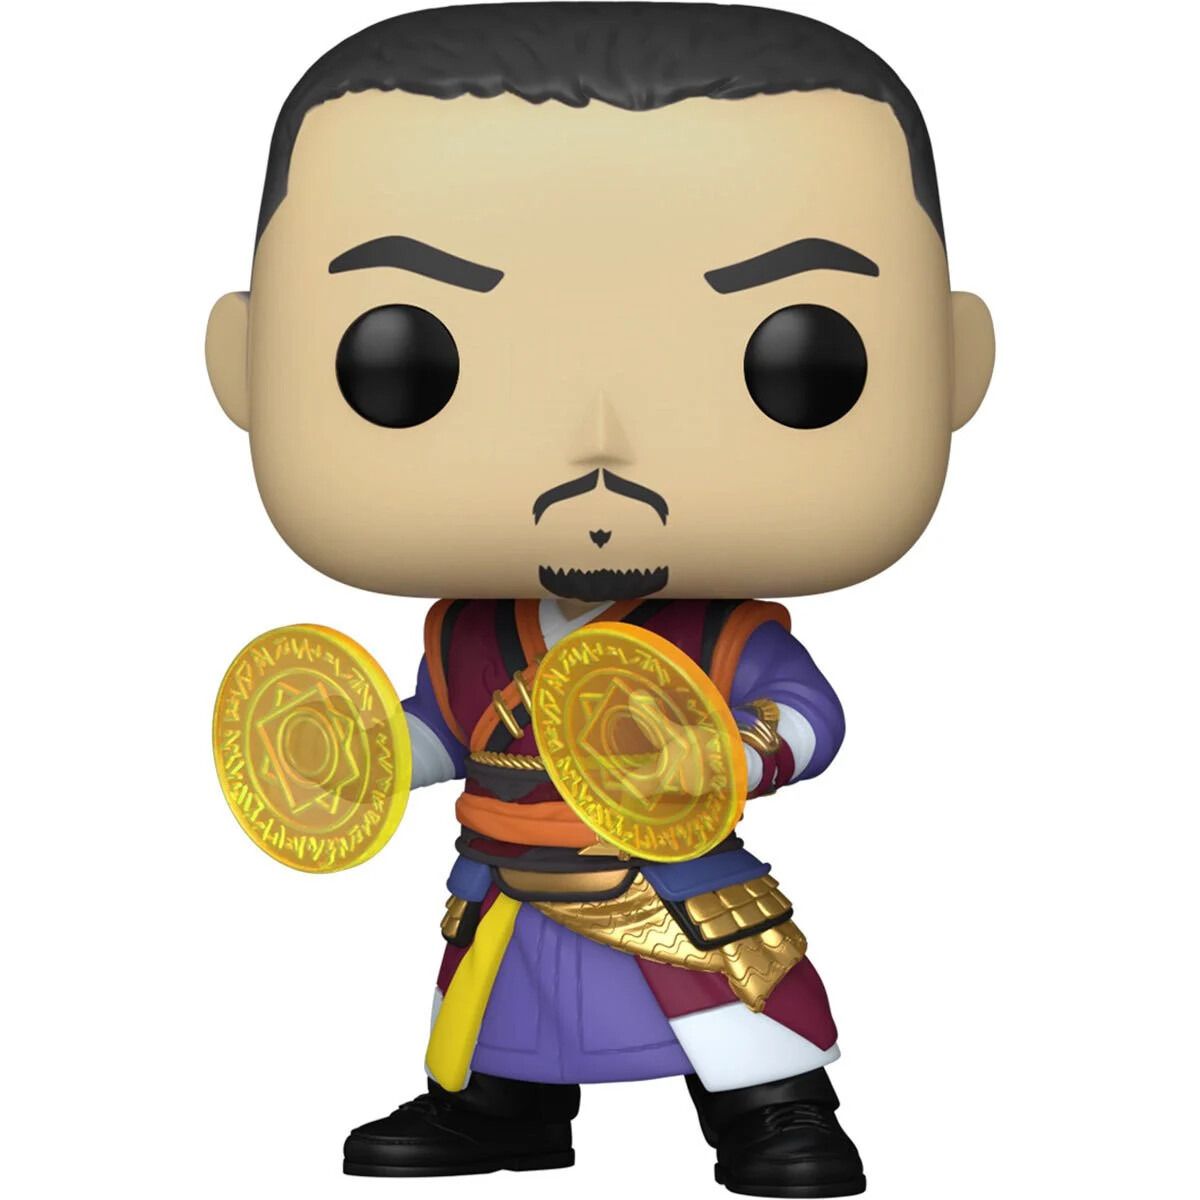 PRE-ORDER Doctor Strange in the Multiverse of Madness - Wong Pop! Vinyl Figure - 2nd batch